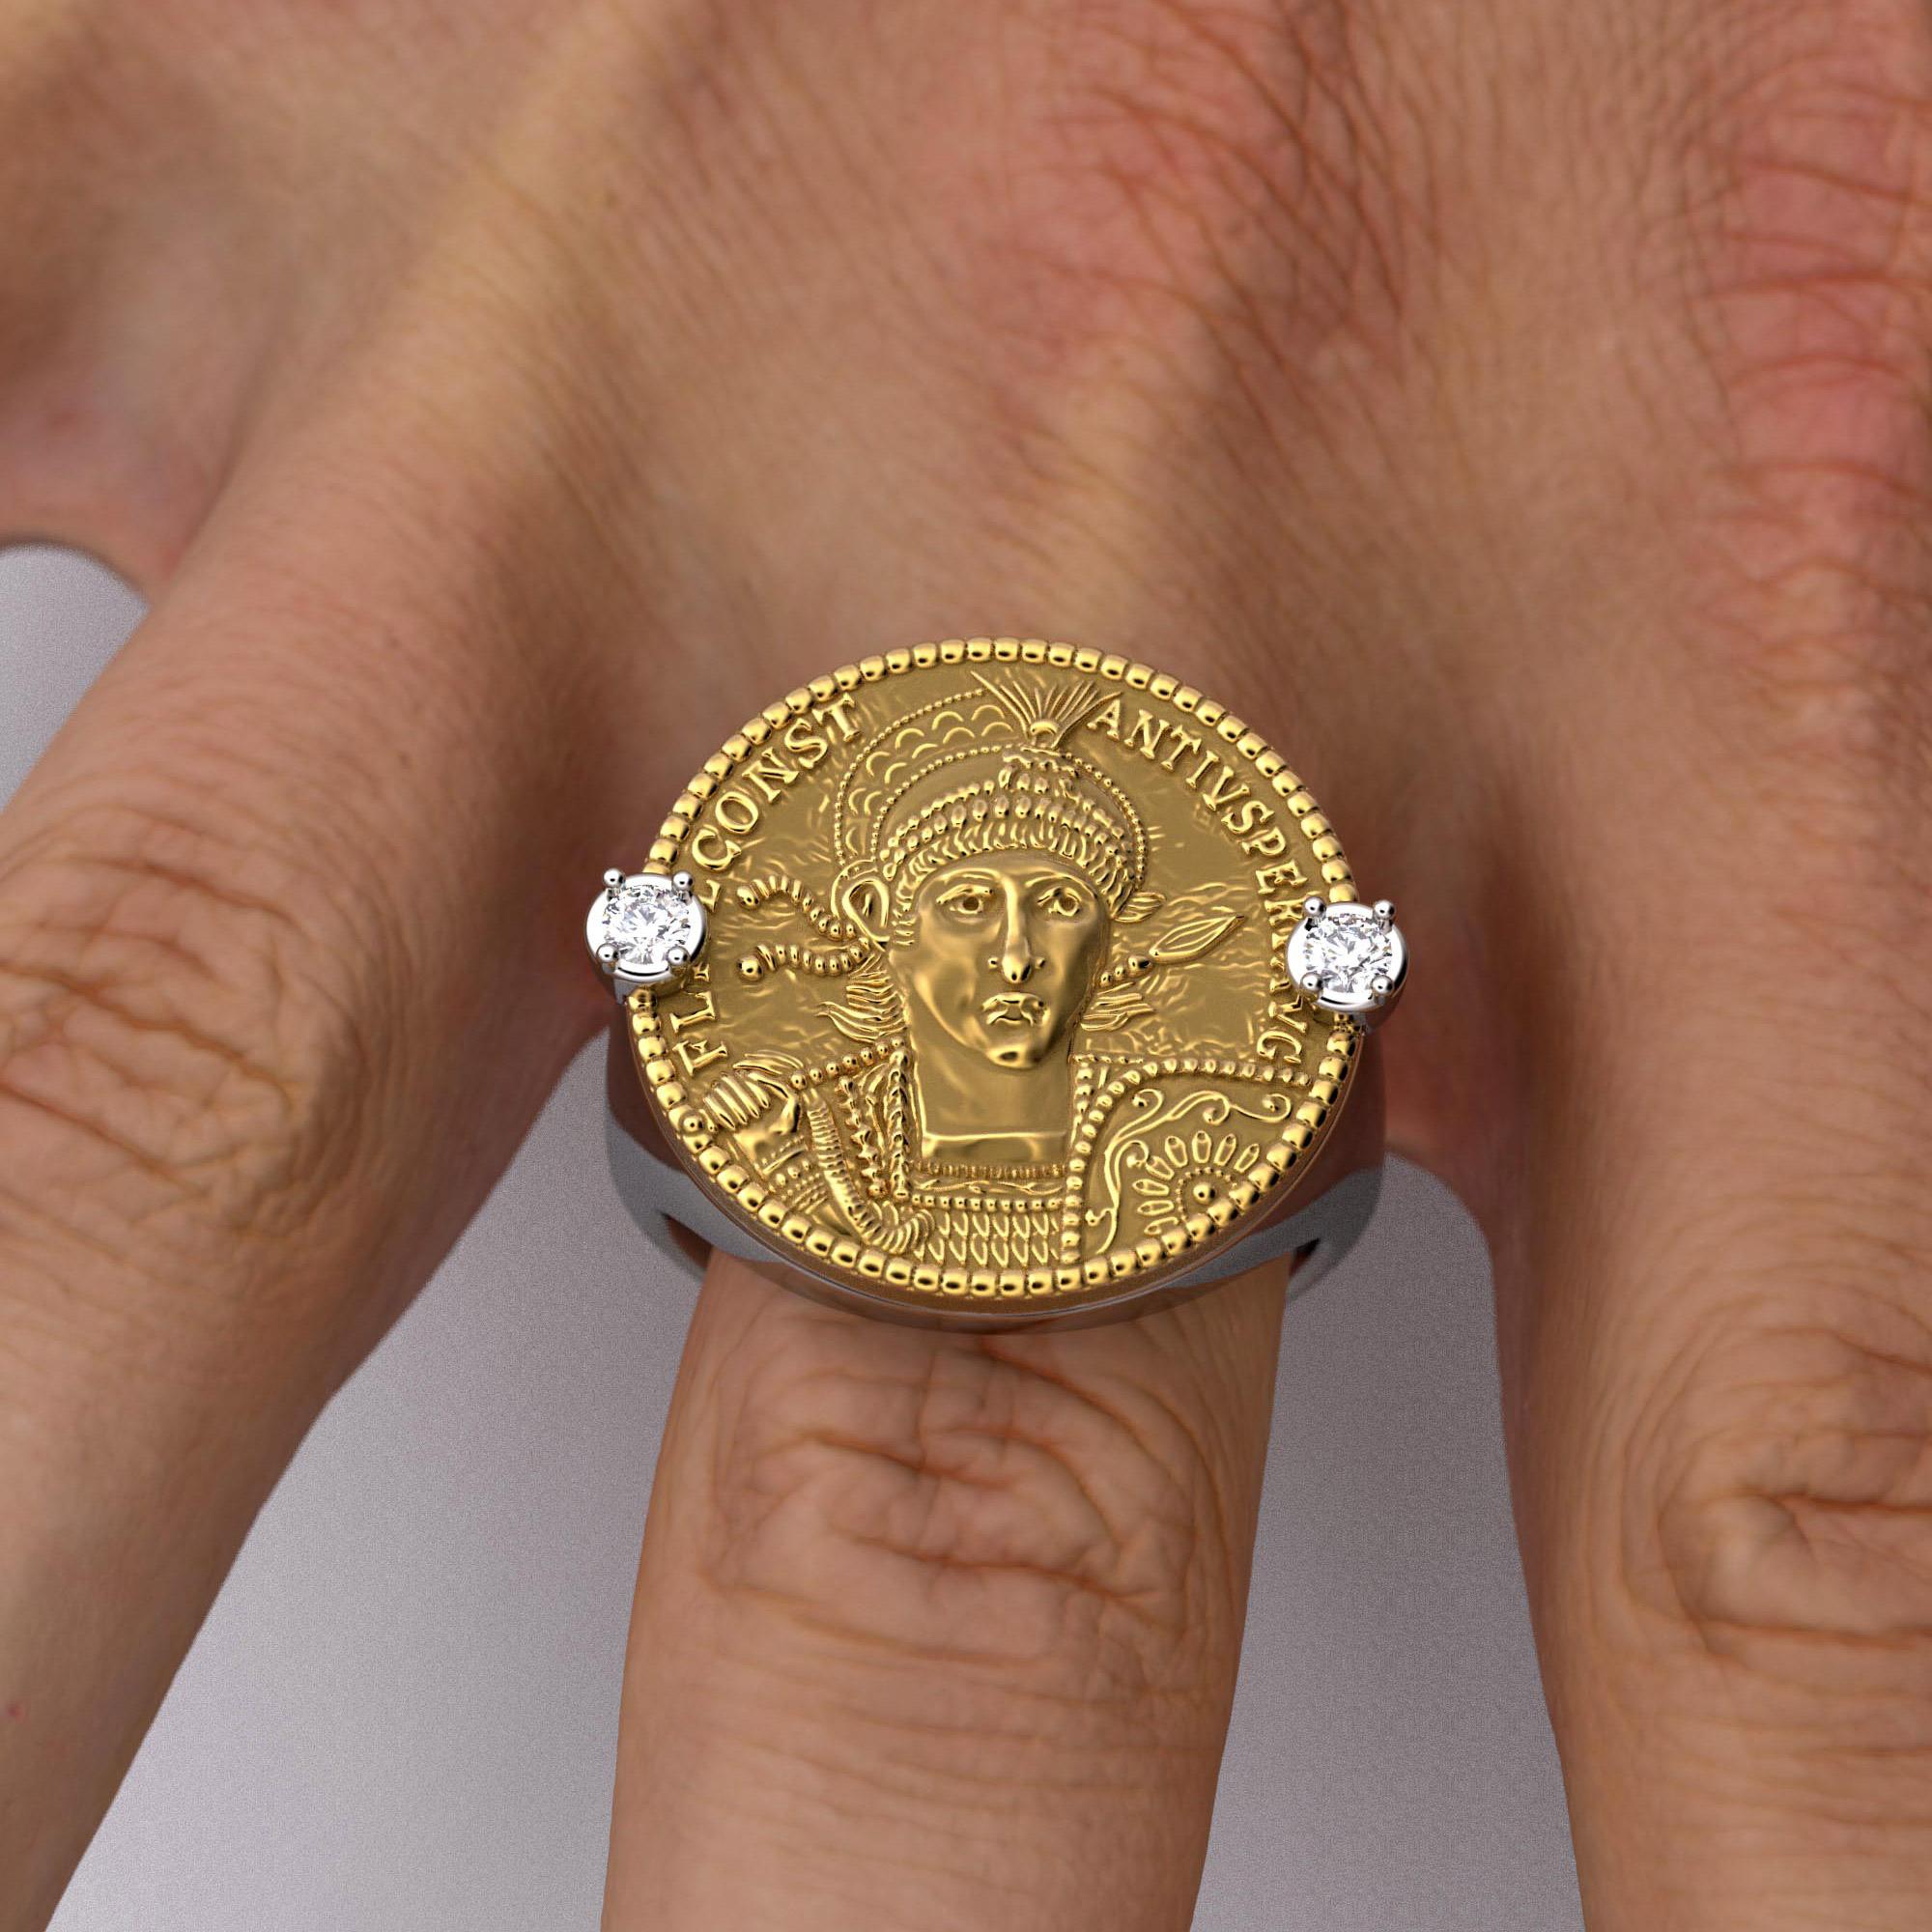 For Sale:  18k Ancient Roman Style Gold Coin Ring with a reproduction of a Roman Solidus 10